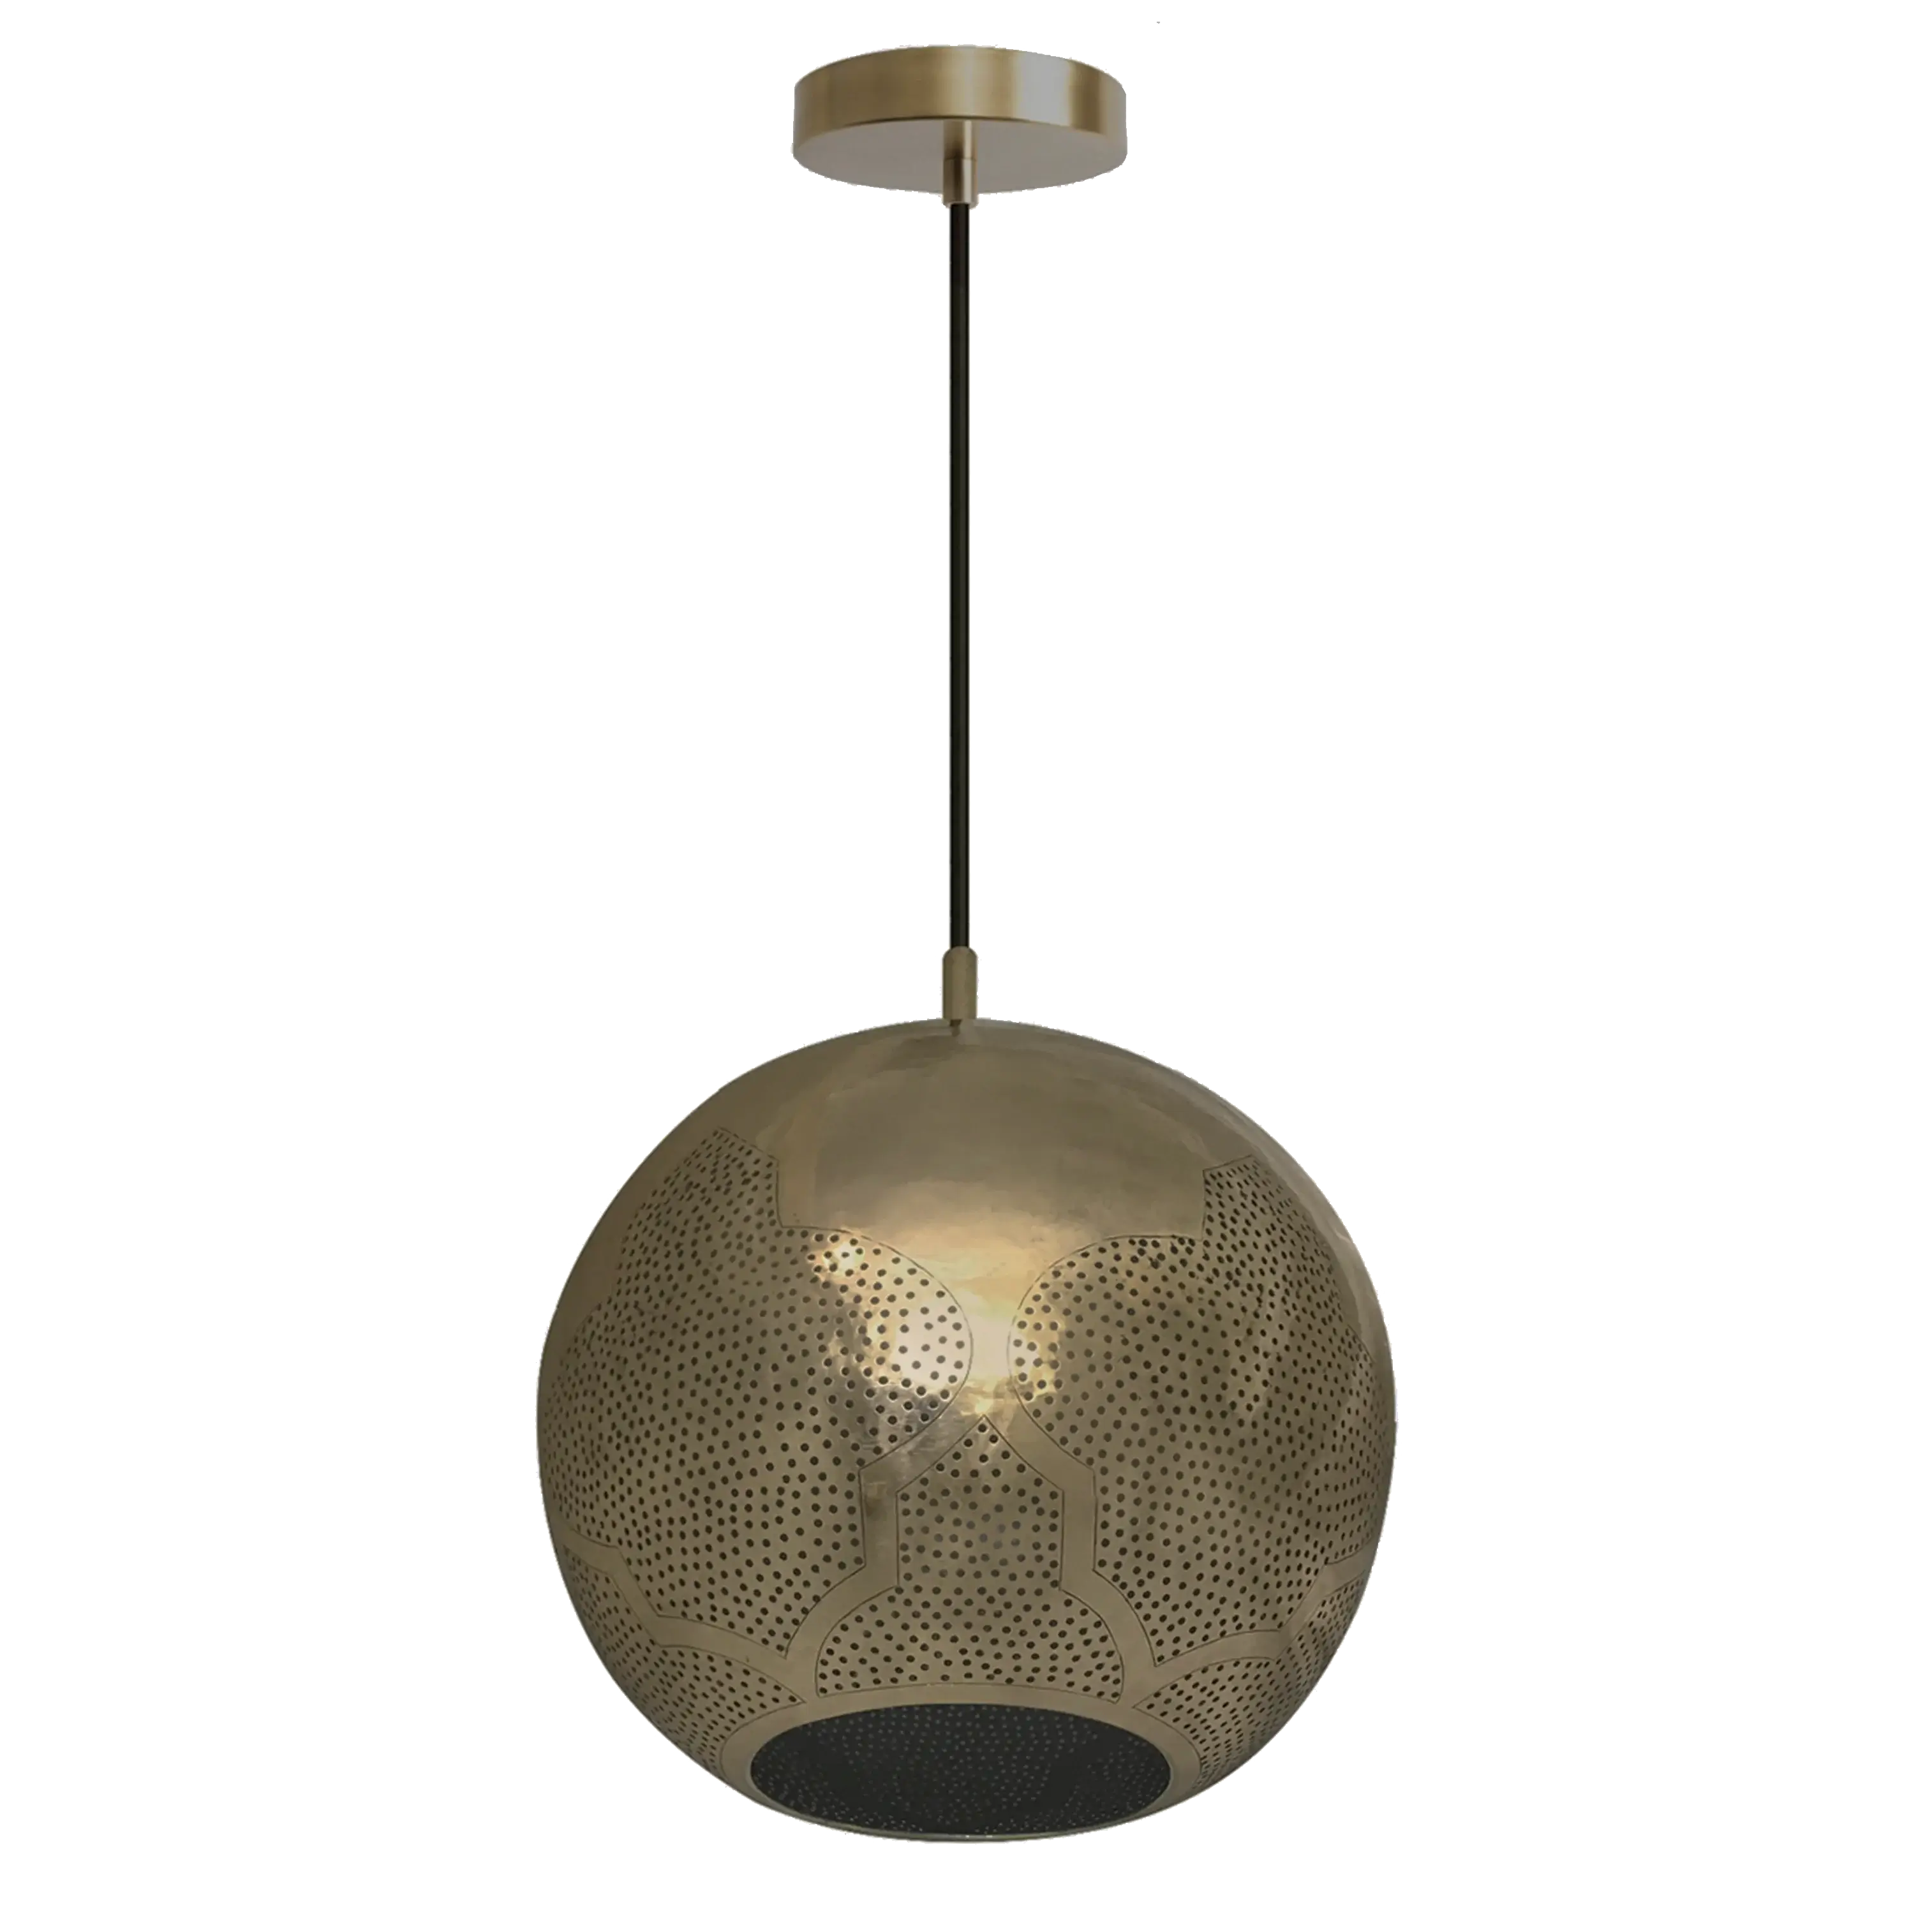 Dounia home Pendant light in antique brass  made of Metal, Model: Najma reversed